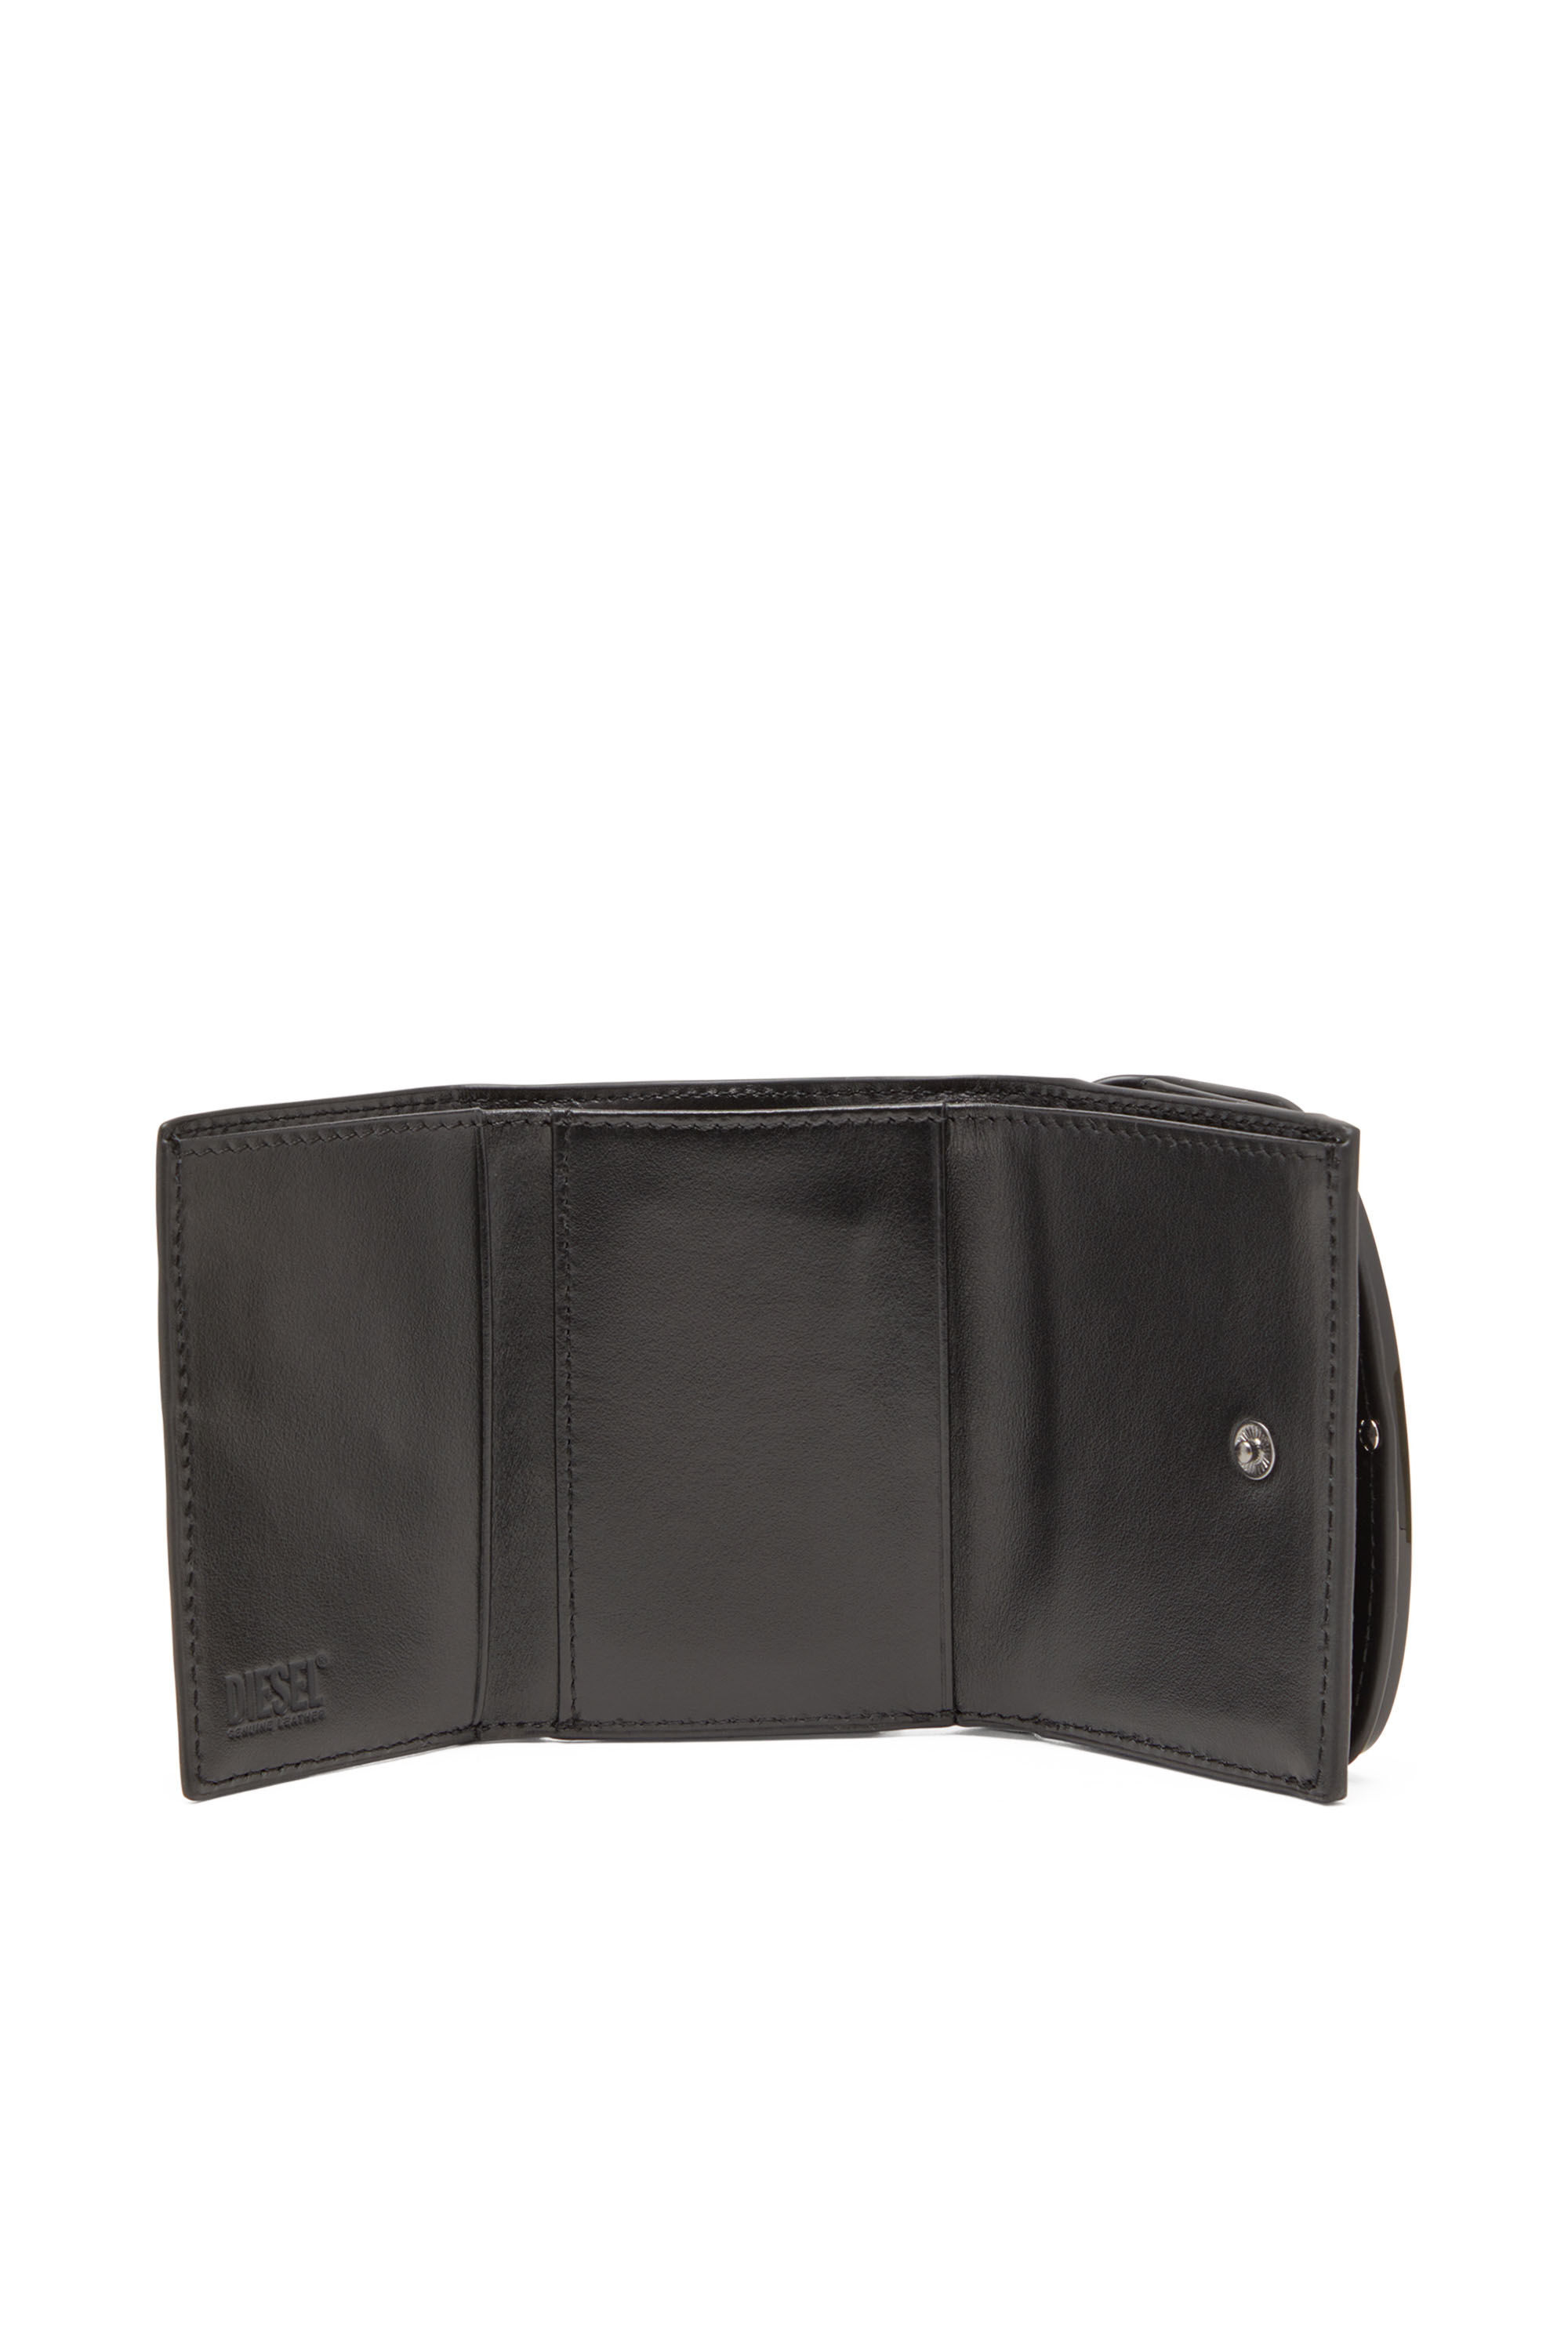 Diesel - 1DR TRI FOLD COIN XS II, Female Tri-fold wallet in mirrored leather in ブラック - Image 3